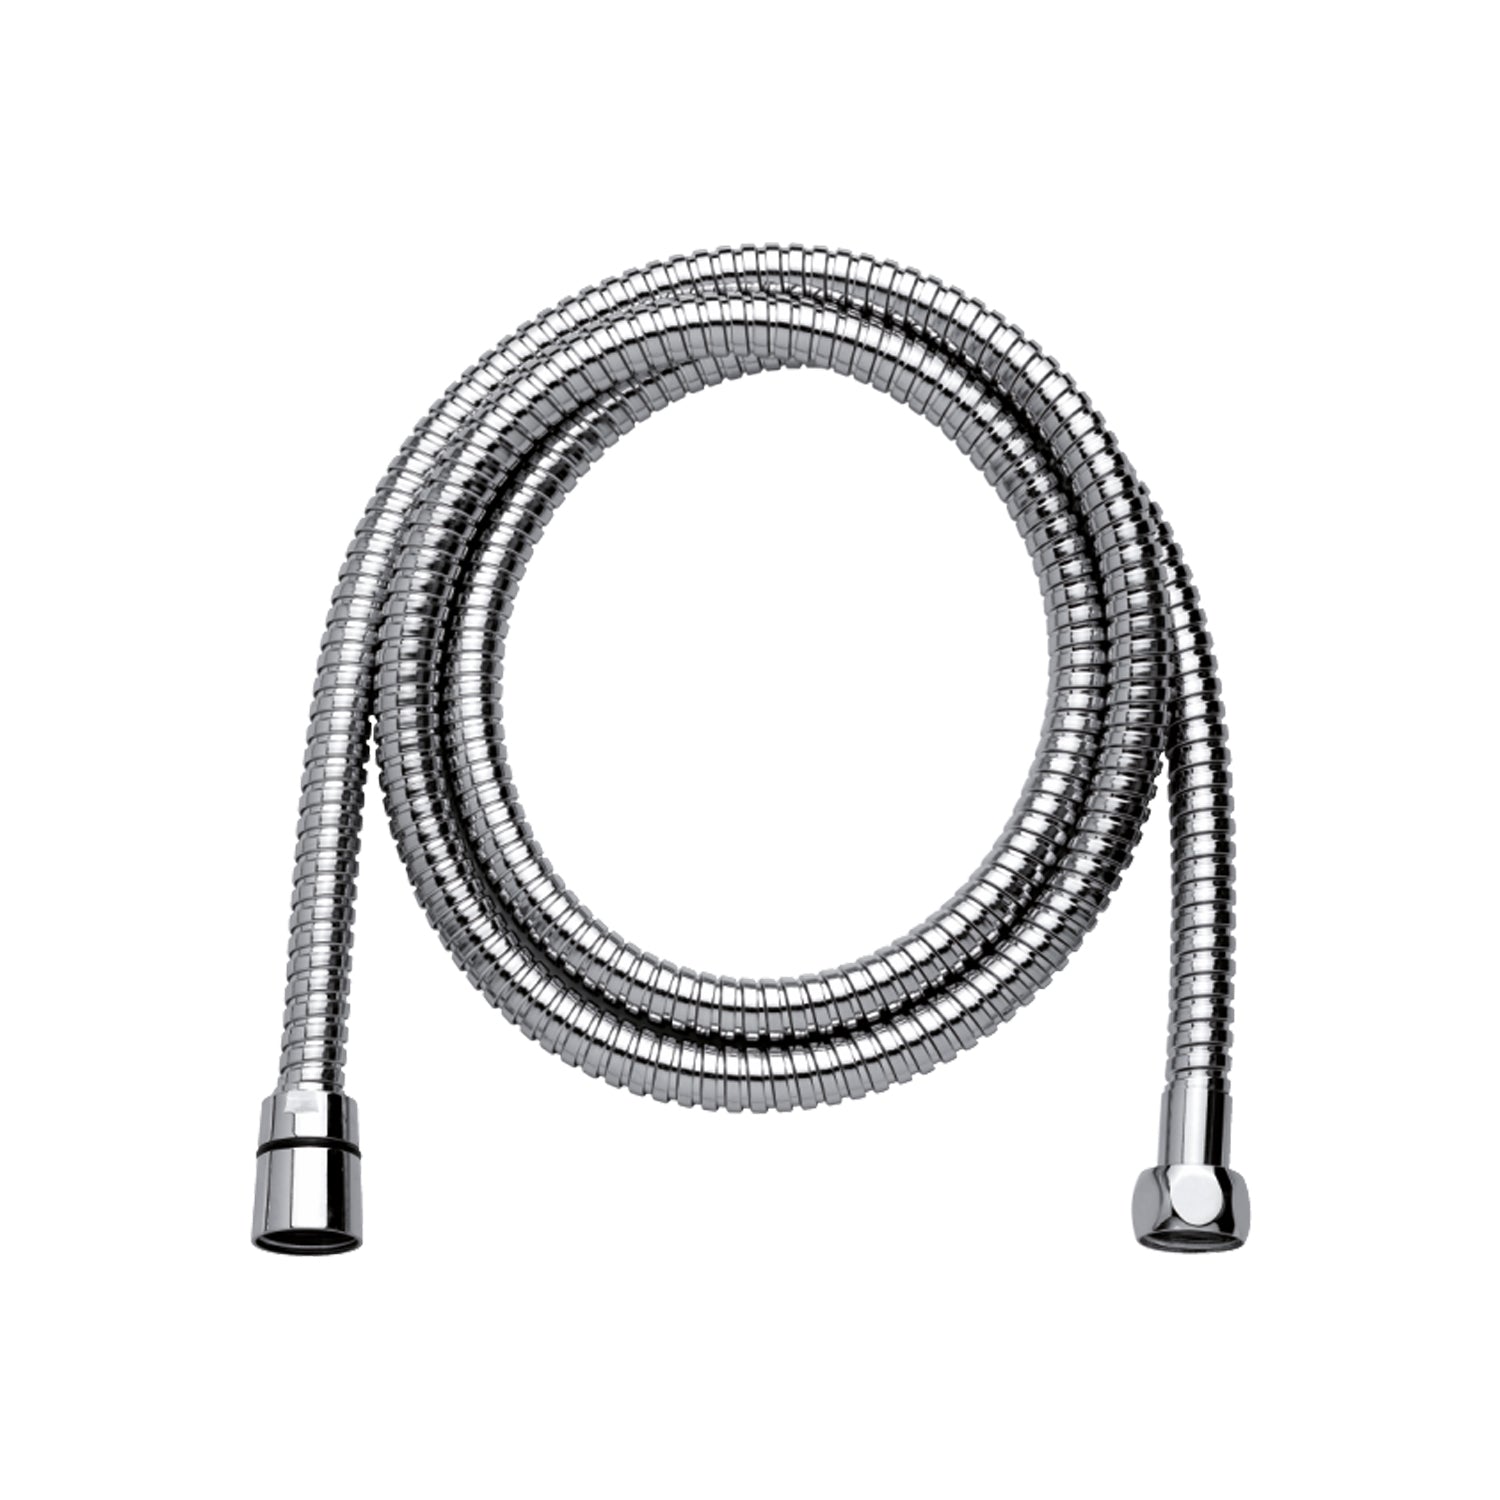 DAX Shower Hose, Rubber Body, Chrome Finish, Long 60-1/2 Inches (D-H34-CR)